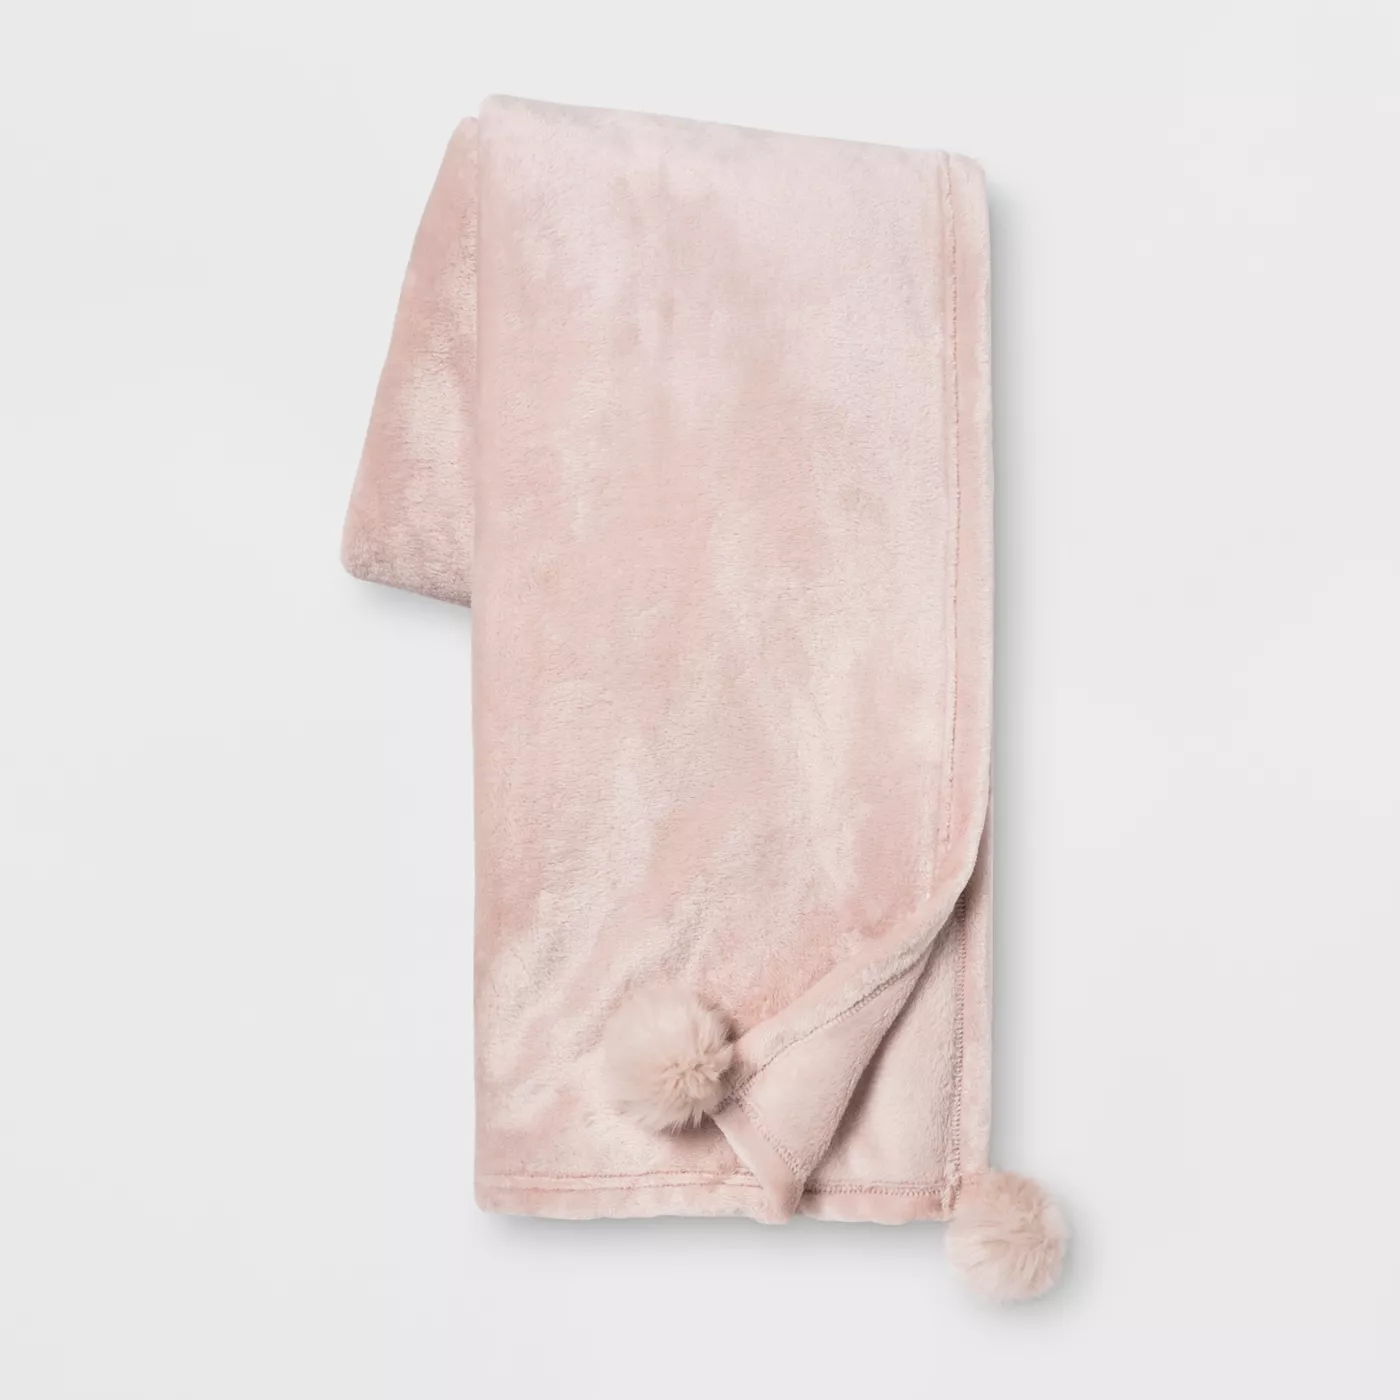 Solid Plush With Faux Fur Poms Throw Blanket - Opalhouse™ - image 1 of 3